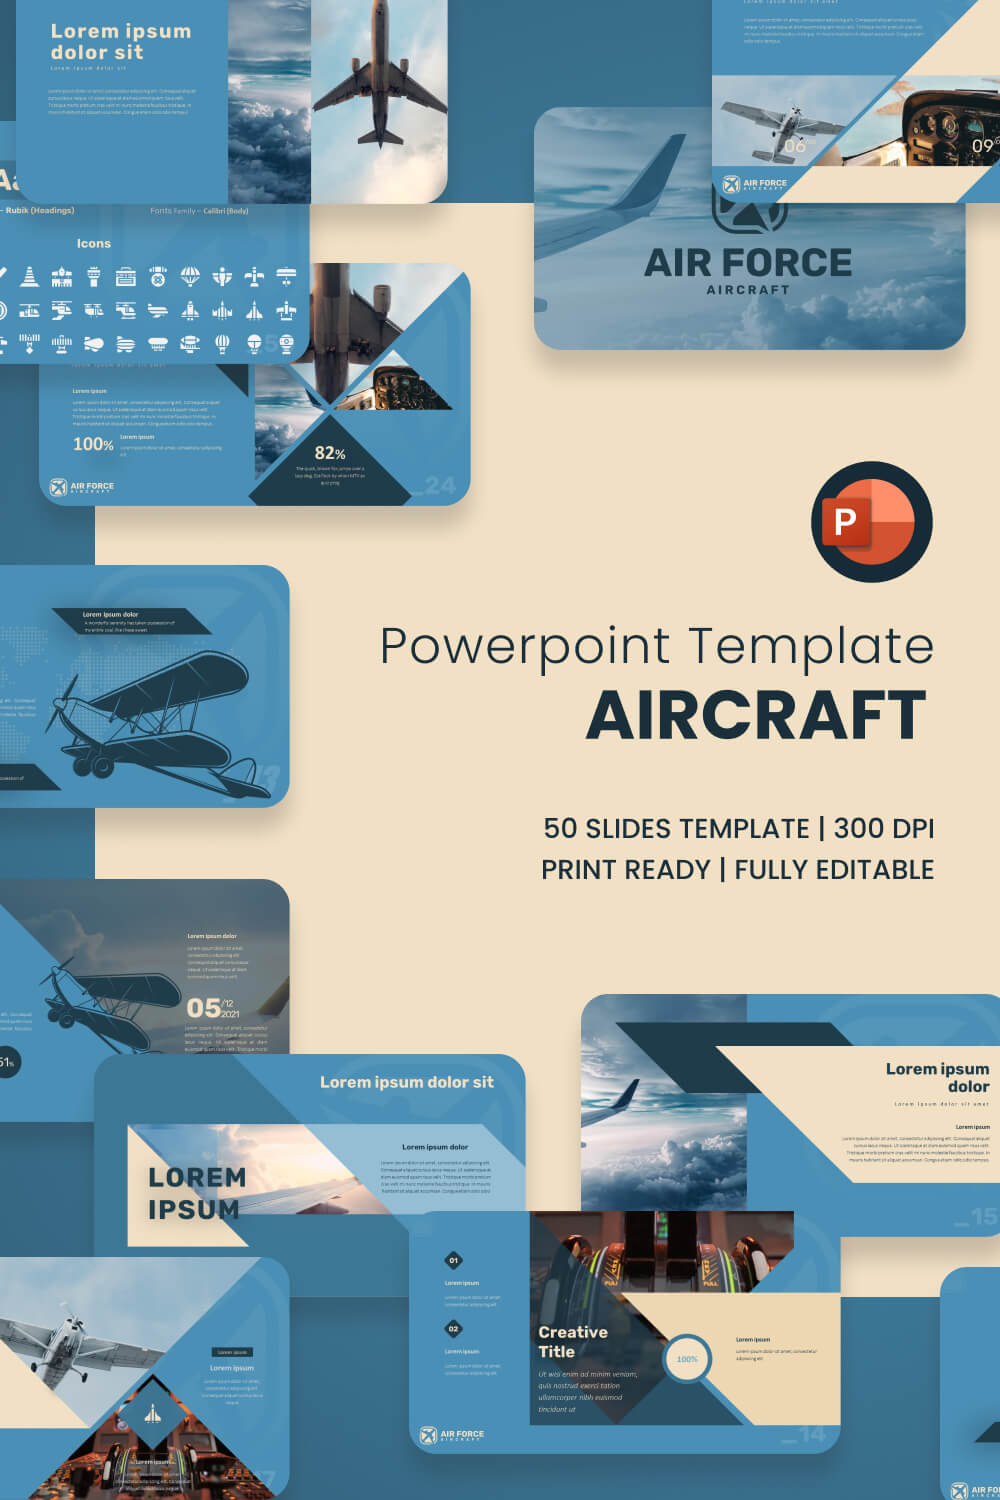 AirForce Military Powerpoint Presentation Template pinterest.